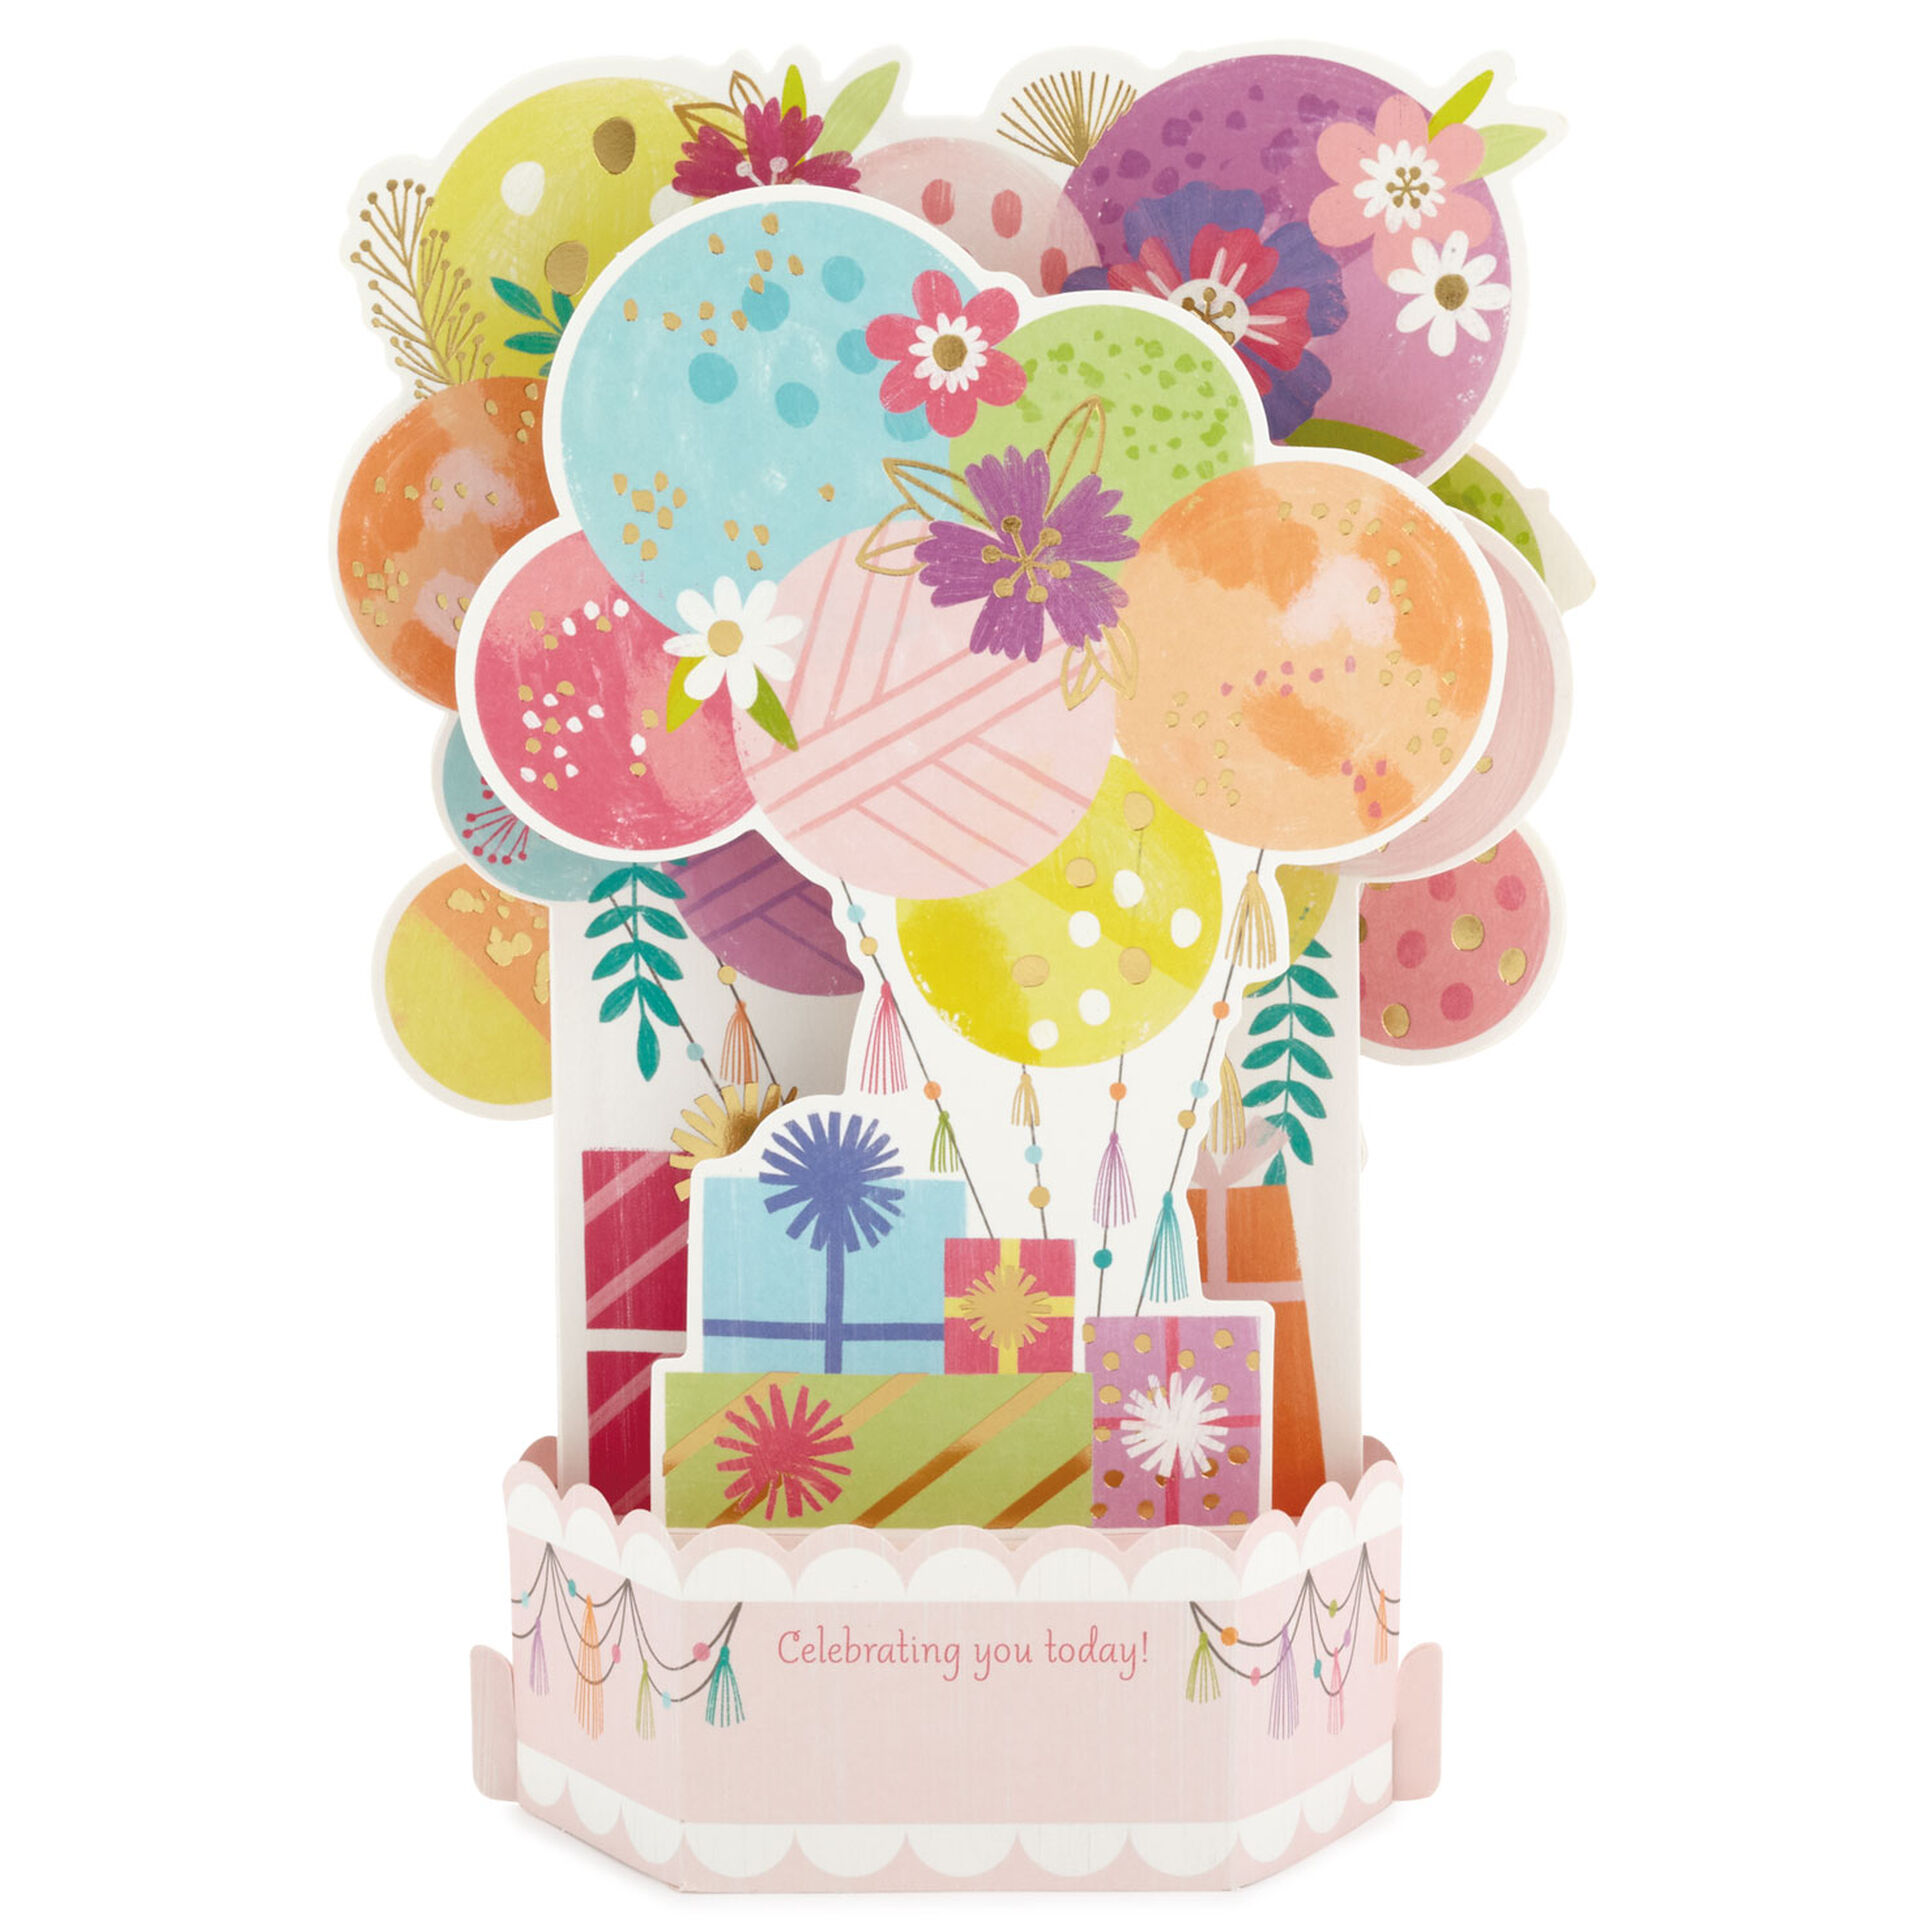 Balloons Musical 3D Pop-Up Birthday Card With Light - Greeting Cards - Hallmark